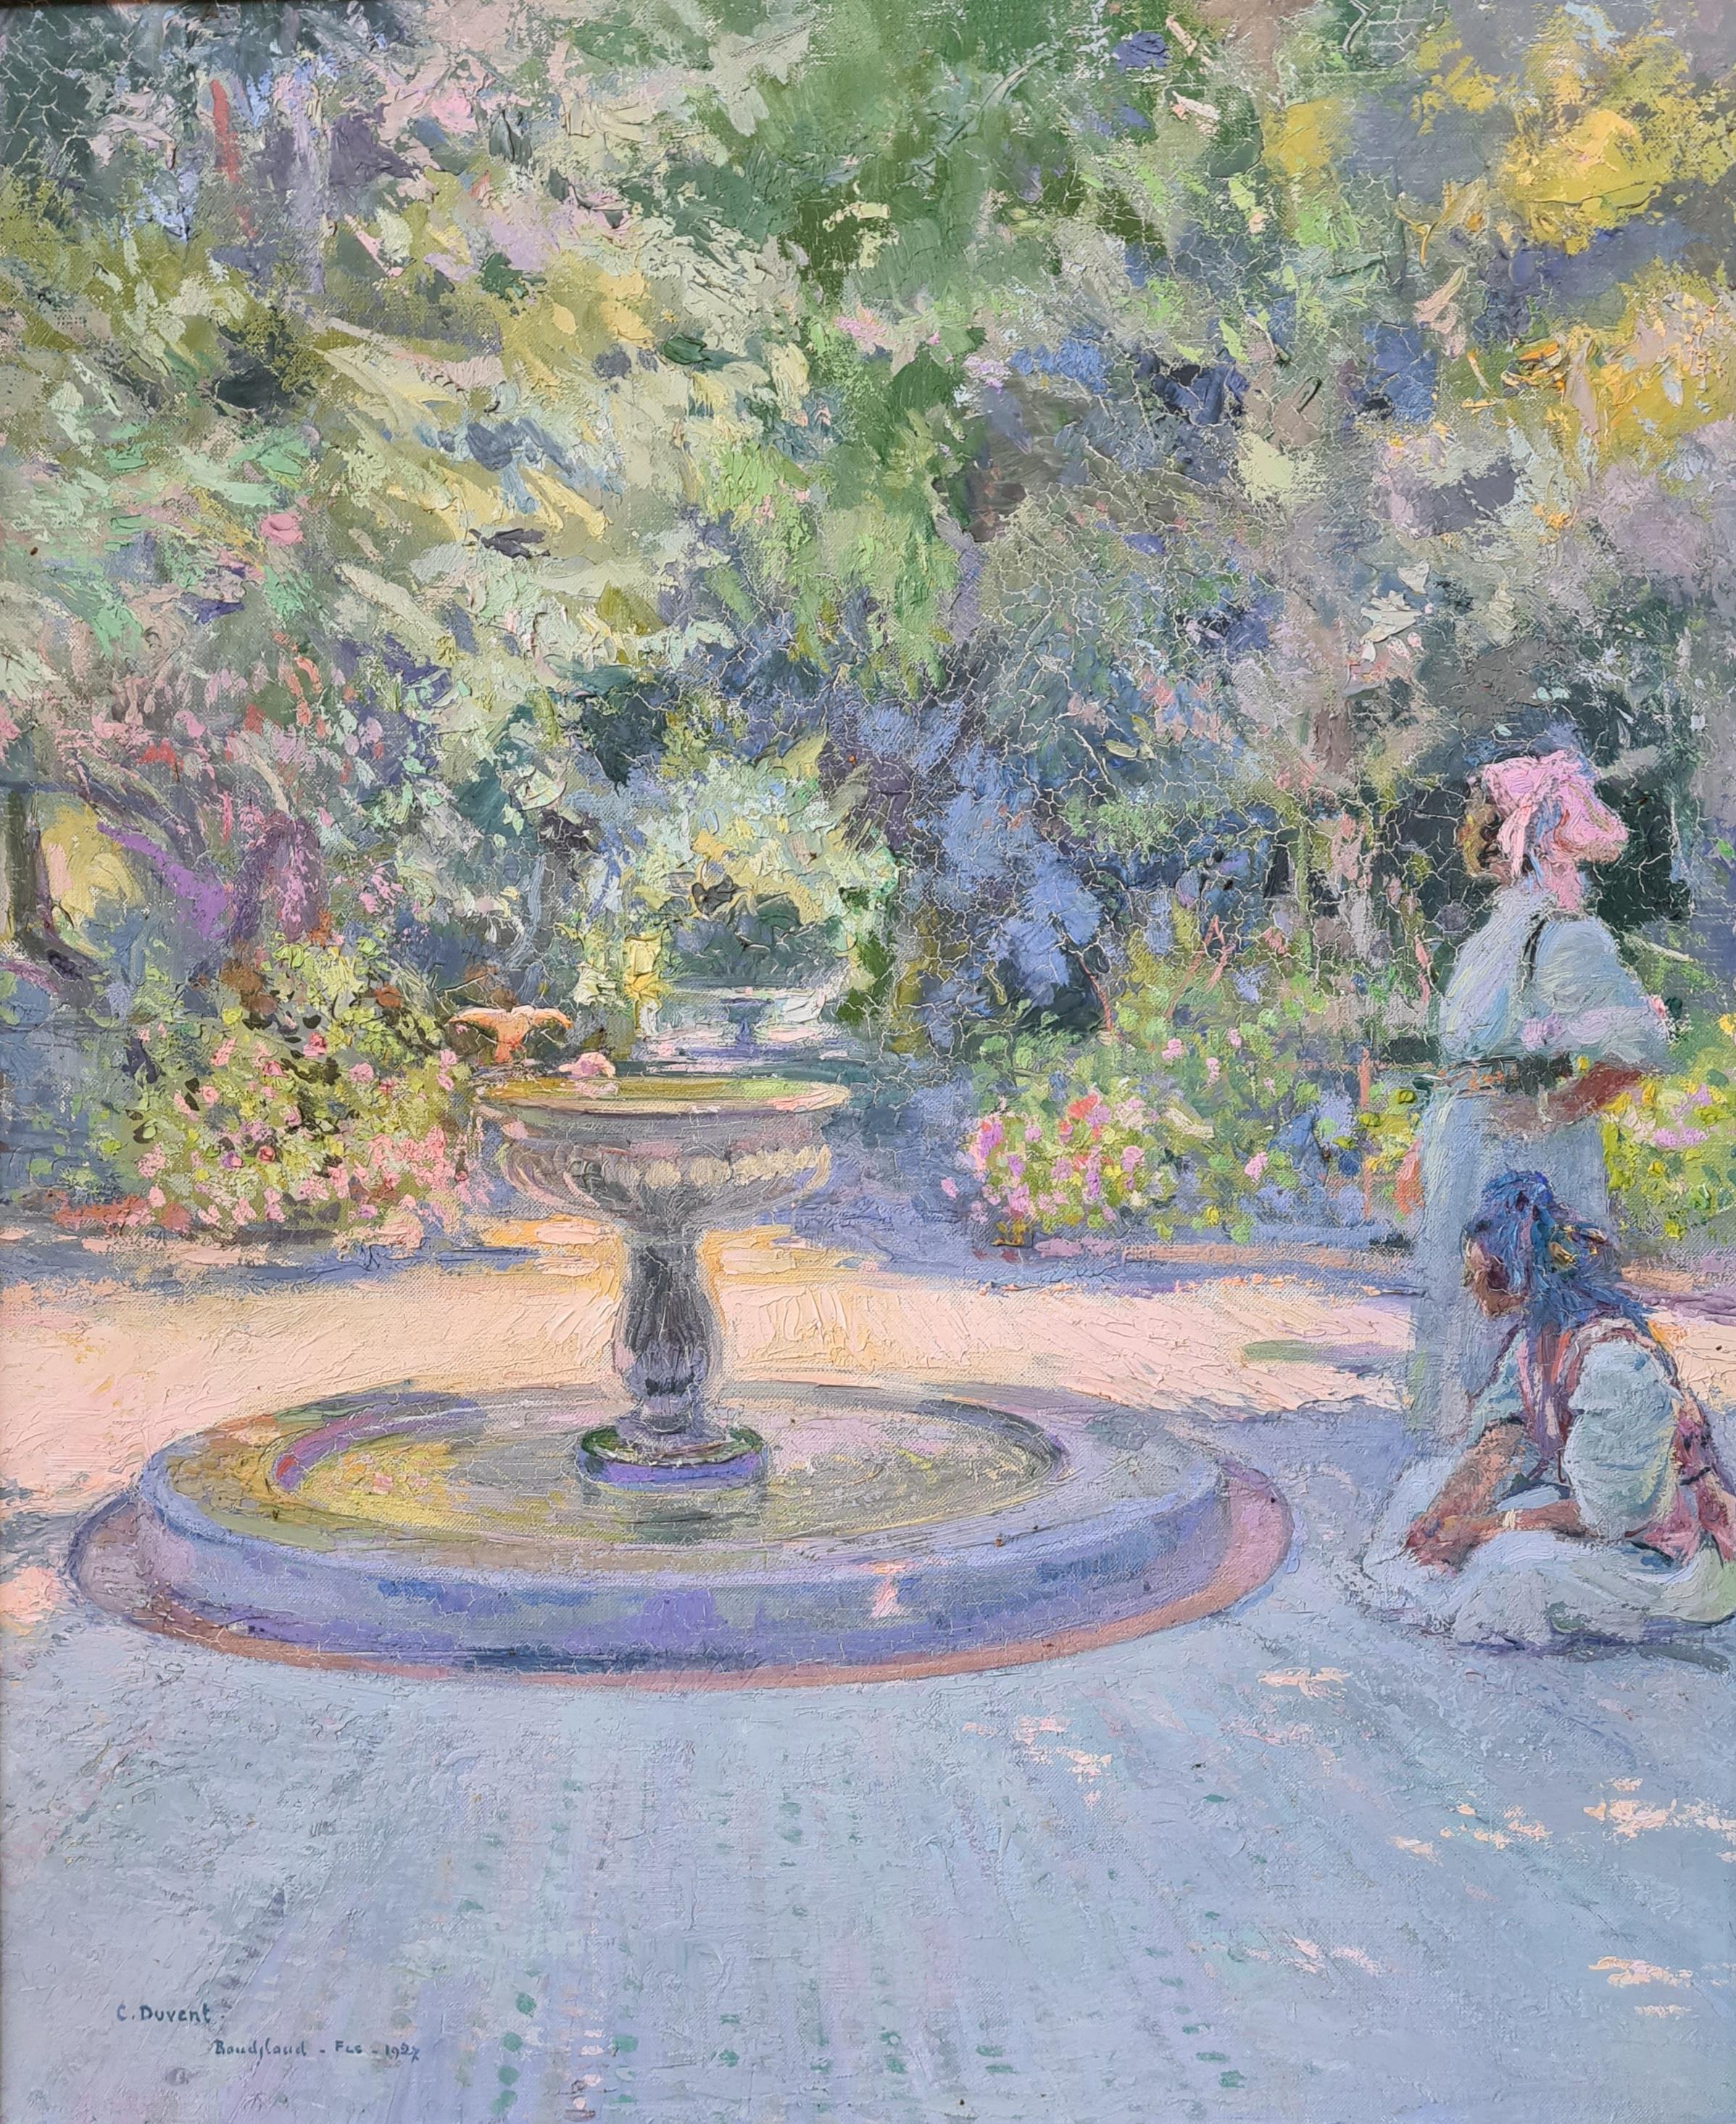 Charles Duvent Figurative Painting - Orientalist Garden, Boujloud, Fès, Ladies at the Fountain. Oil on Canvas.